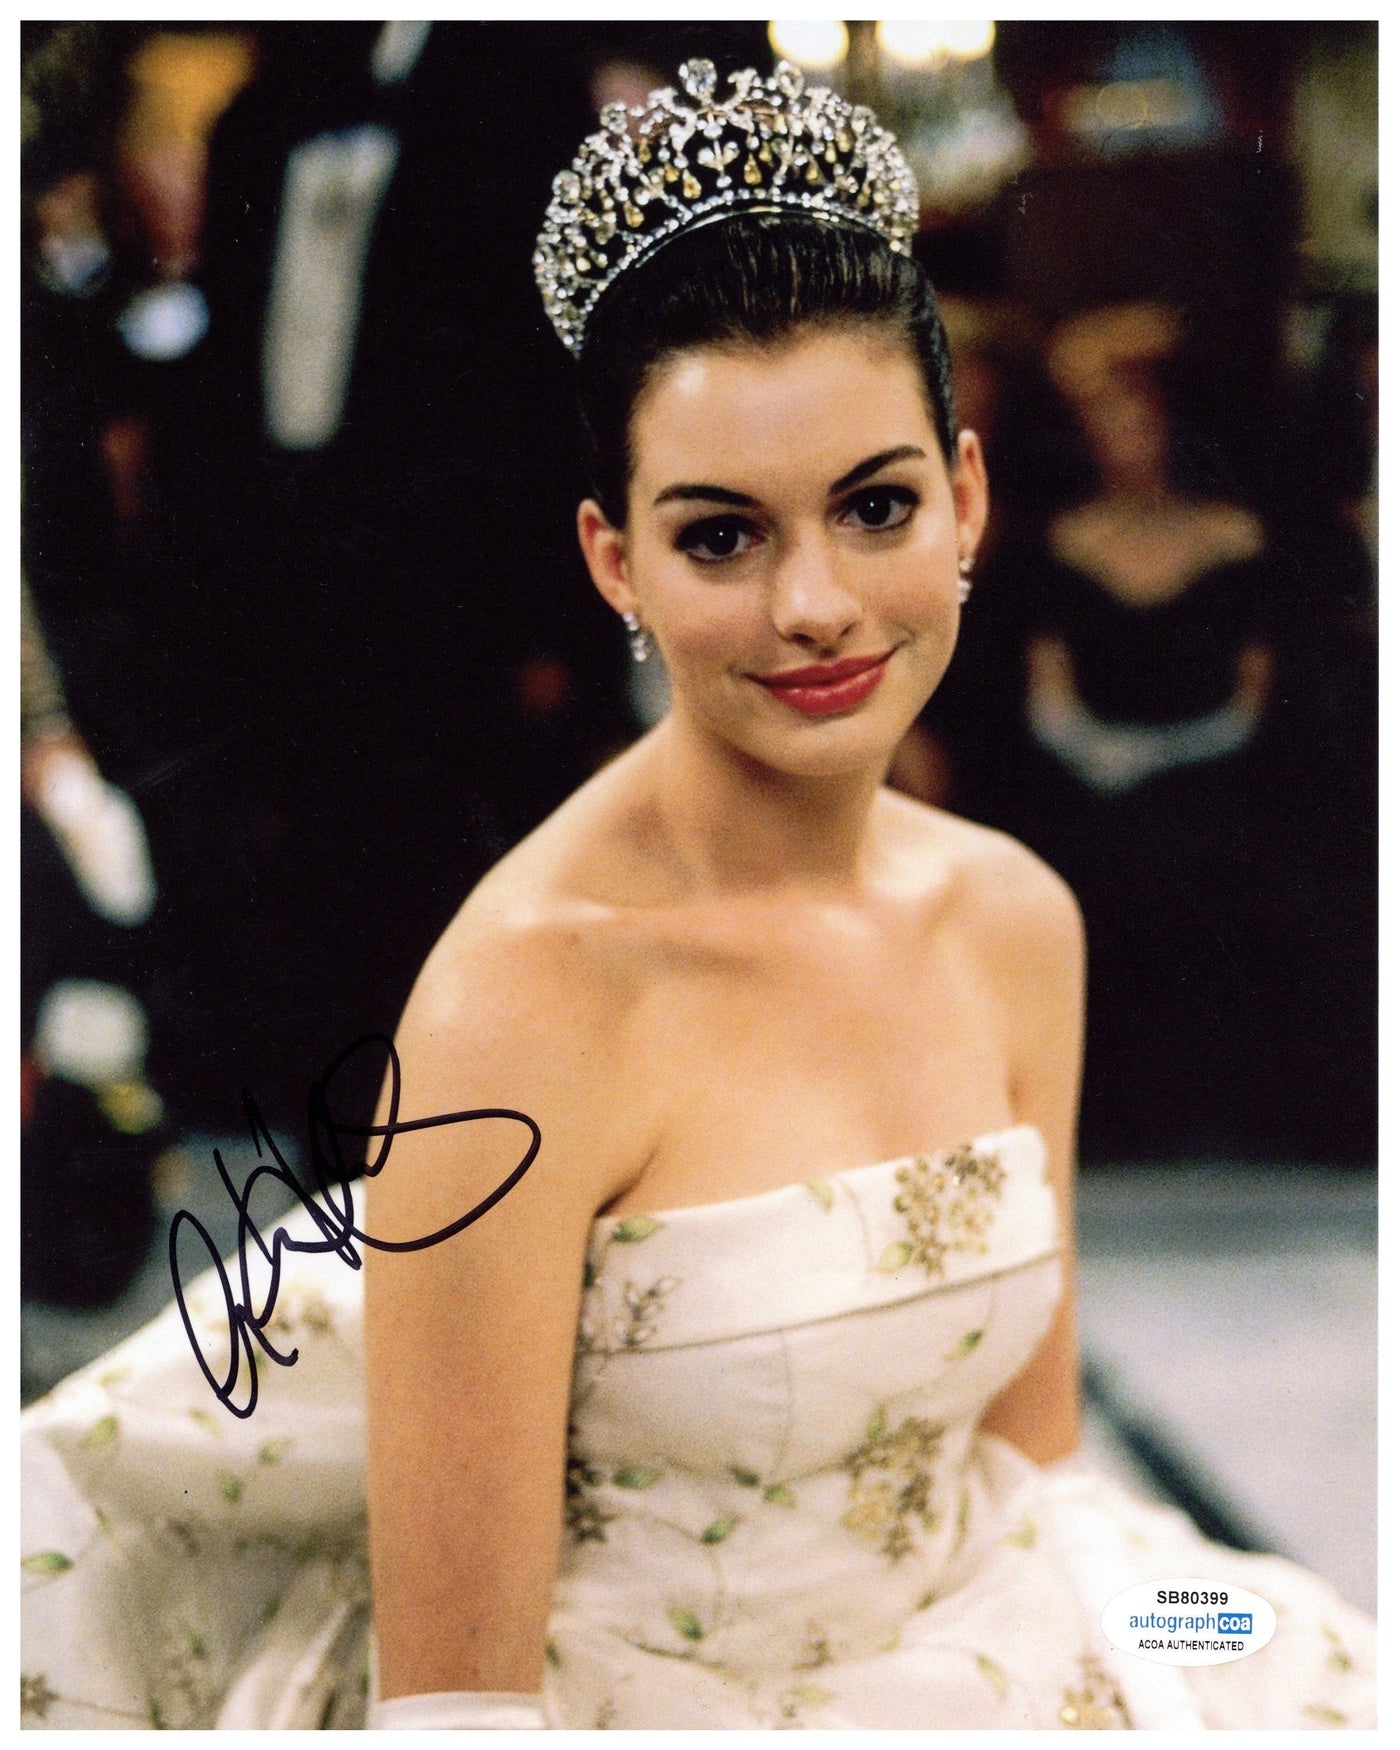 ANNE HATHAWAY SIGNED 8X10 PHOTO THE PRINCESS DIARIES AUTOGRAPHED ACOA 2